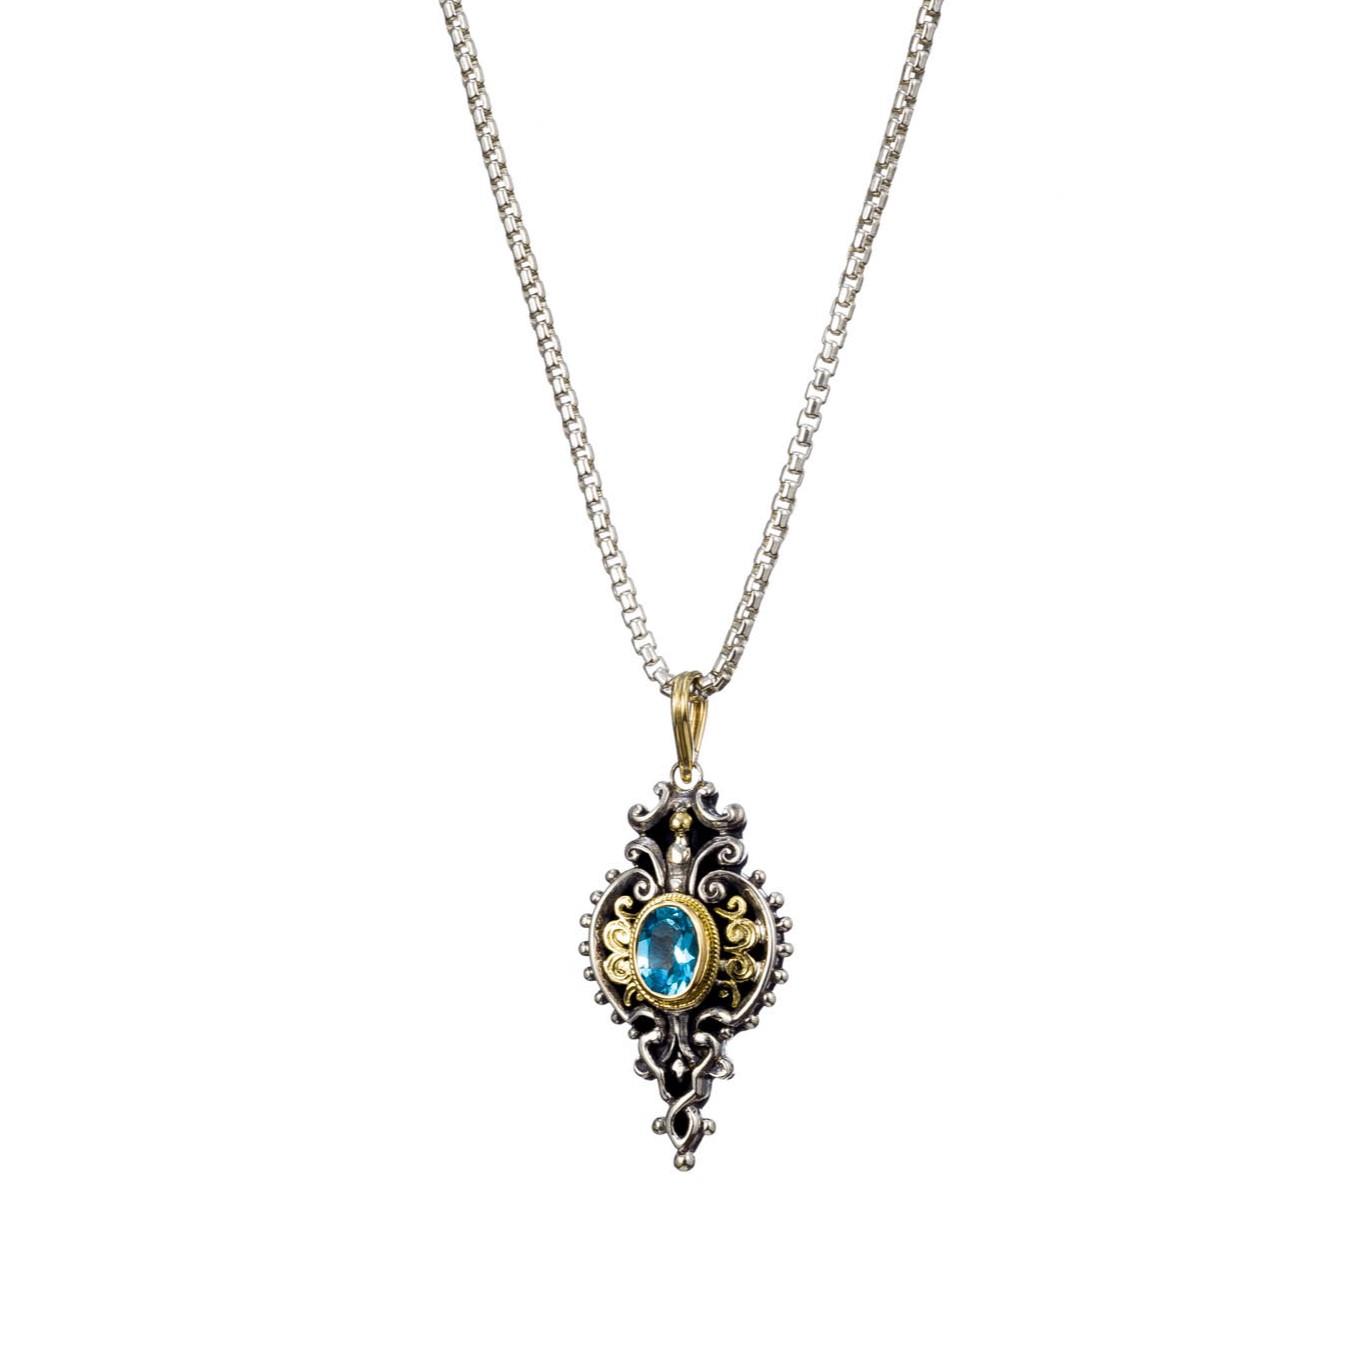 Byzantine pendant in 18K Gold and Sterling Silver with blue topaz